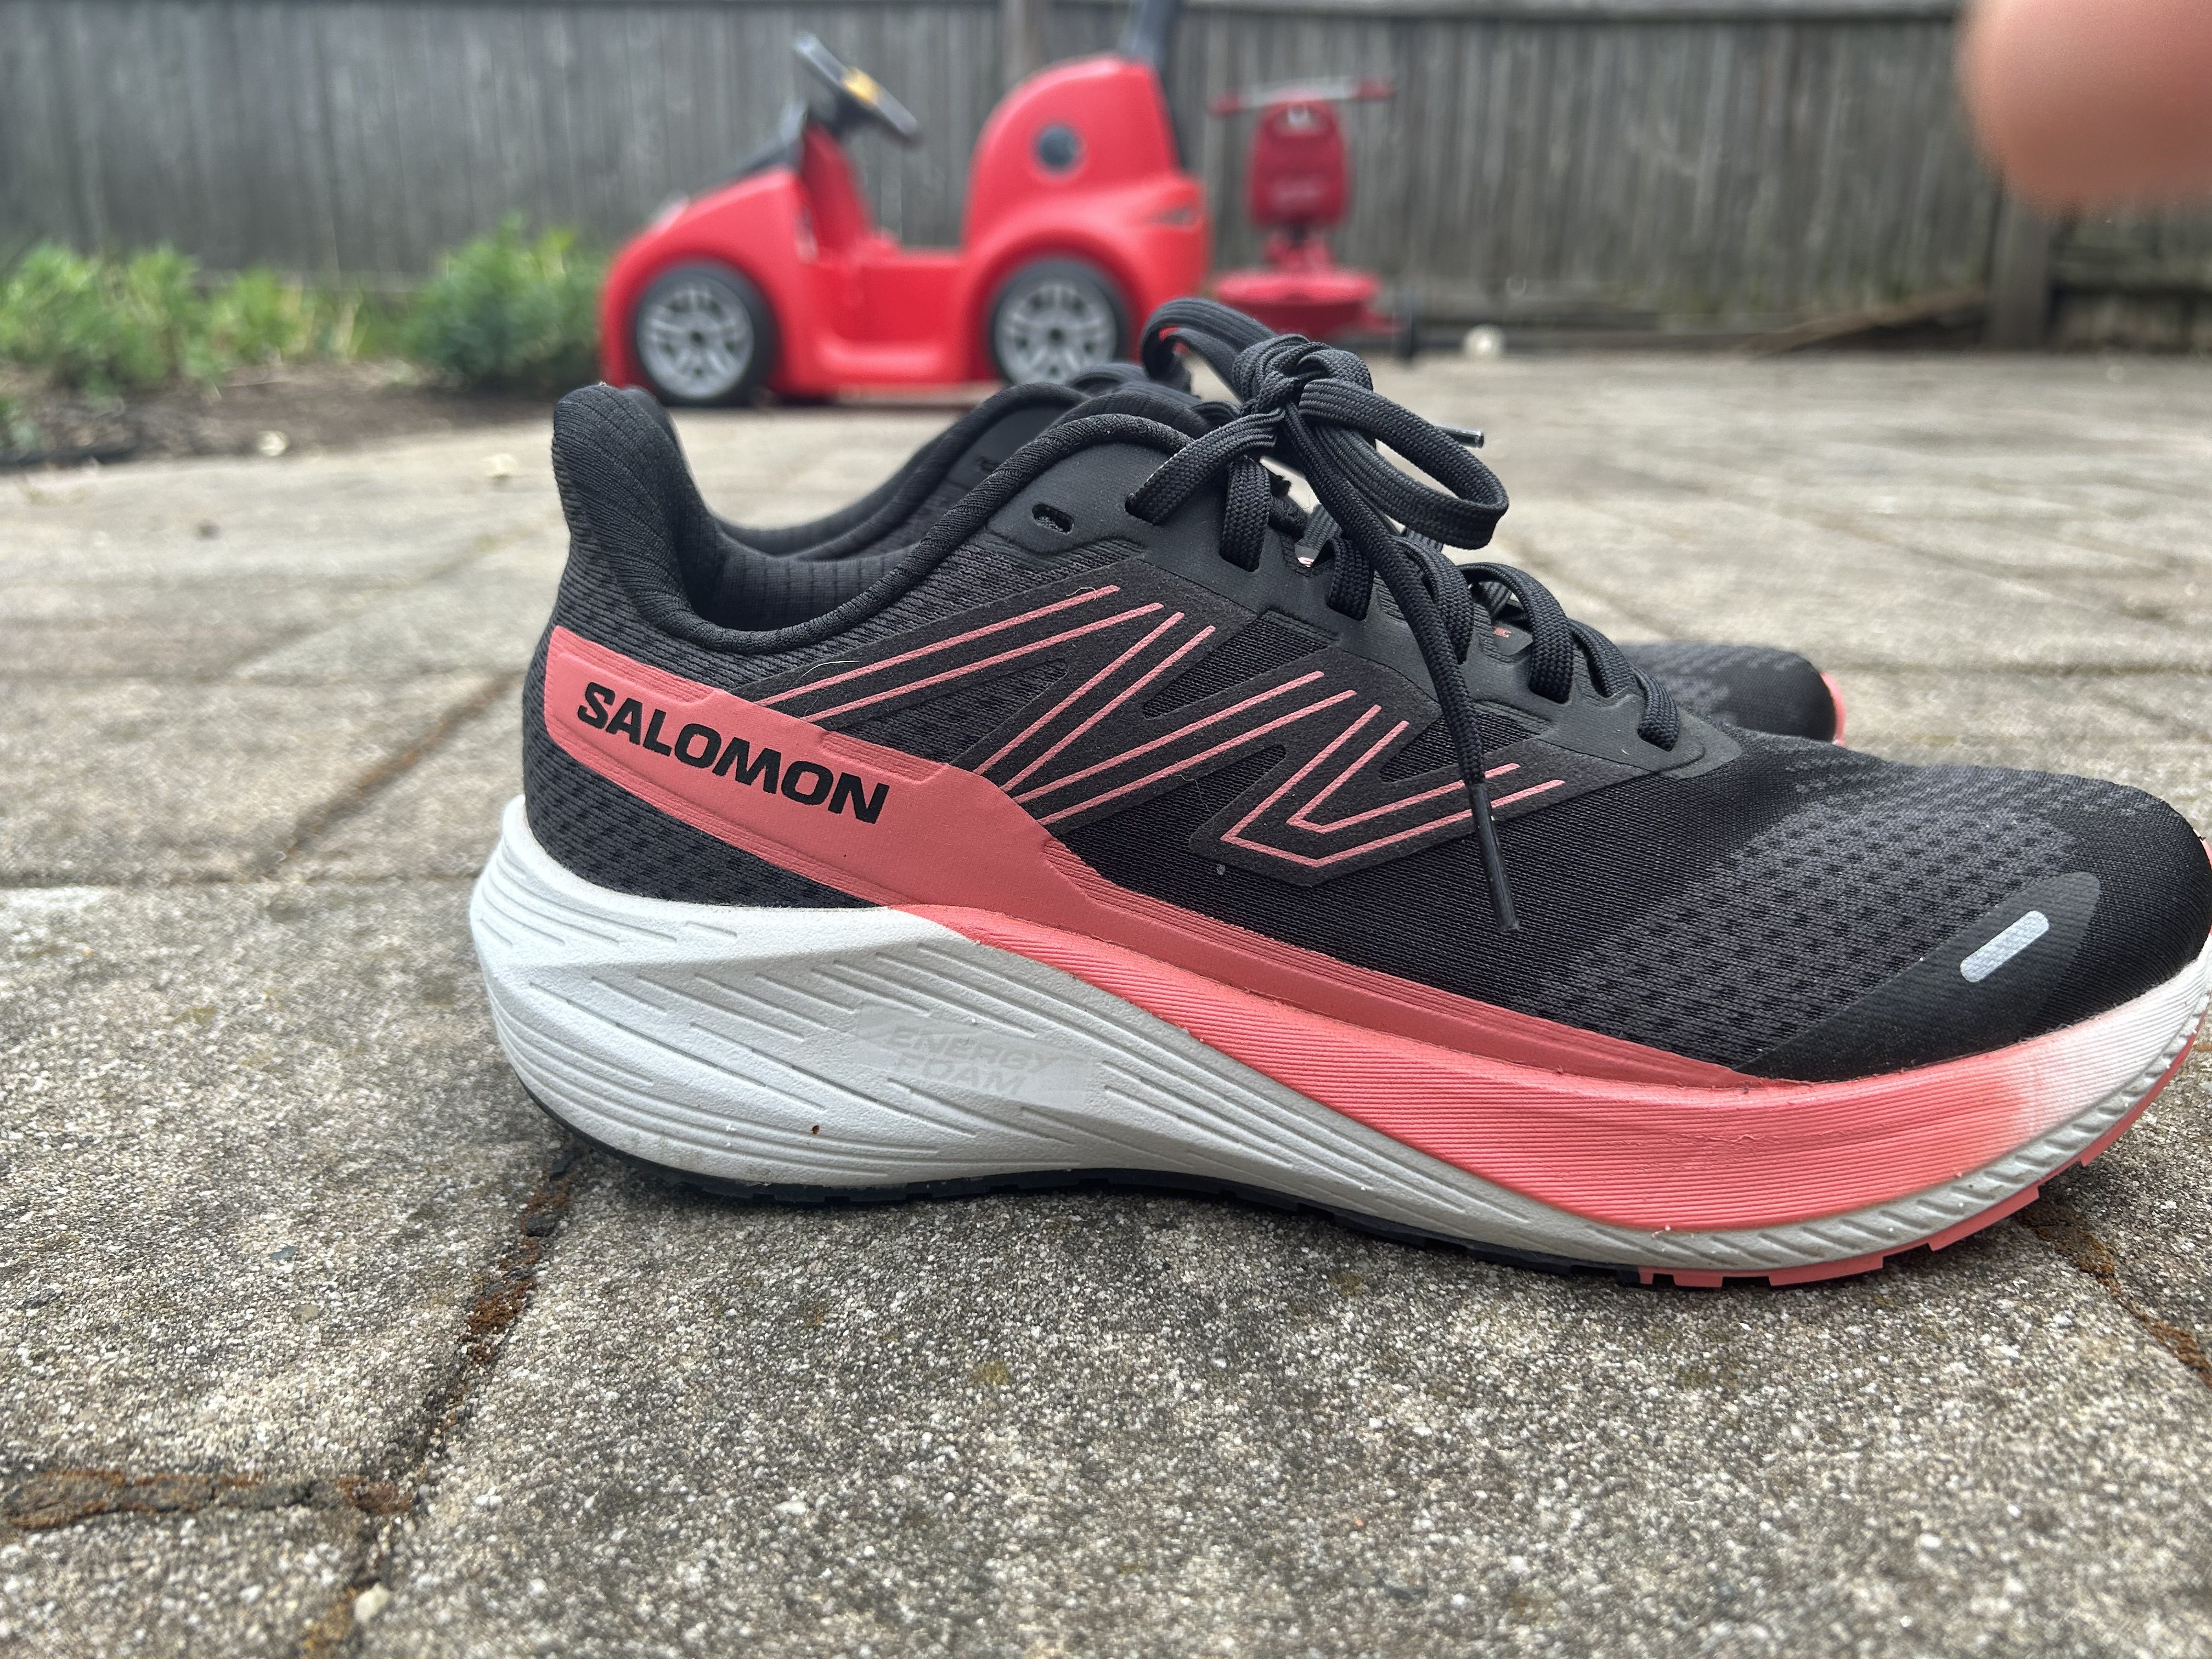 Salomon everyday running shoes: How do they stack up to the blue